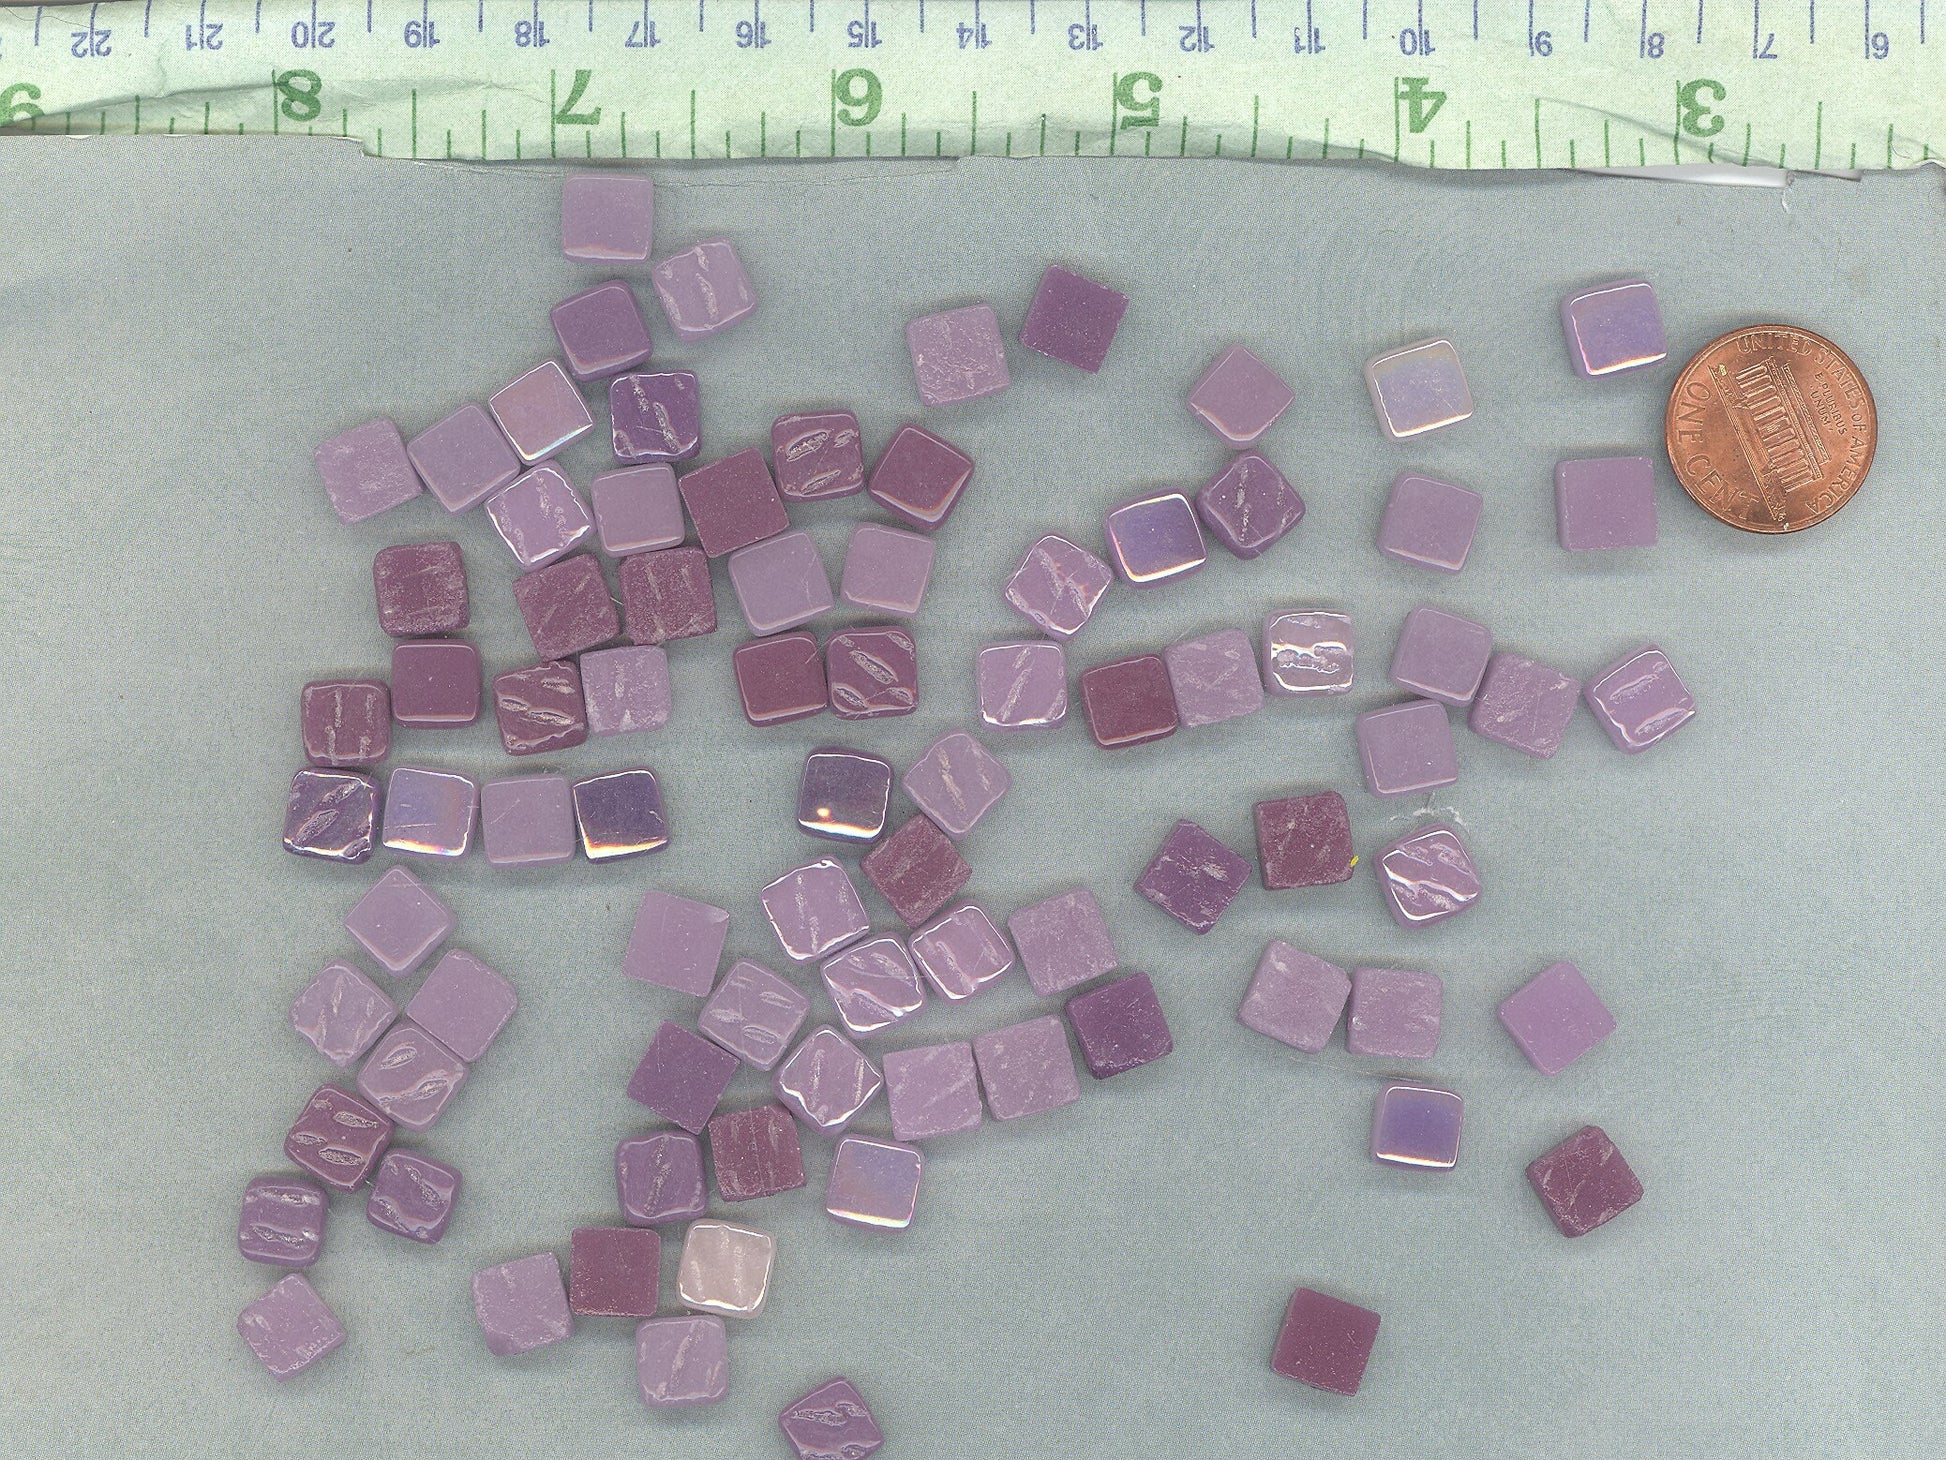 Plenty of Purple Mix Mini Glass Tiles - 8mm Square - 50 grams Opaque Glass Solid Color Mix of Violet Iridescent and Matte Tiles